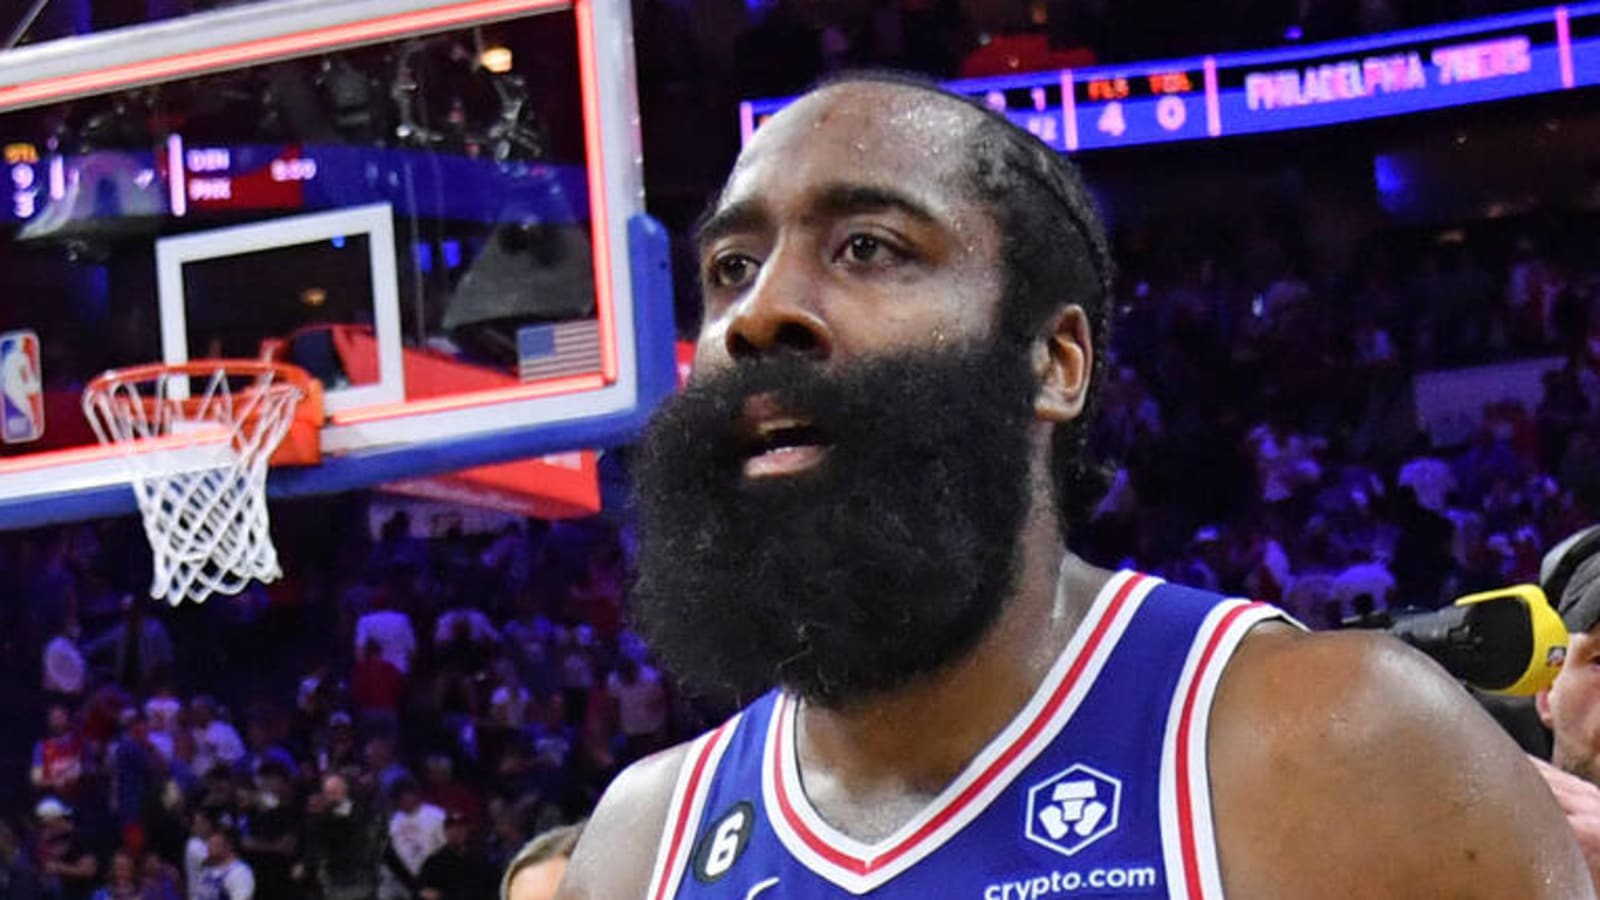 Clippers trade for Harden 'not happening anytime soon'